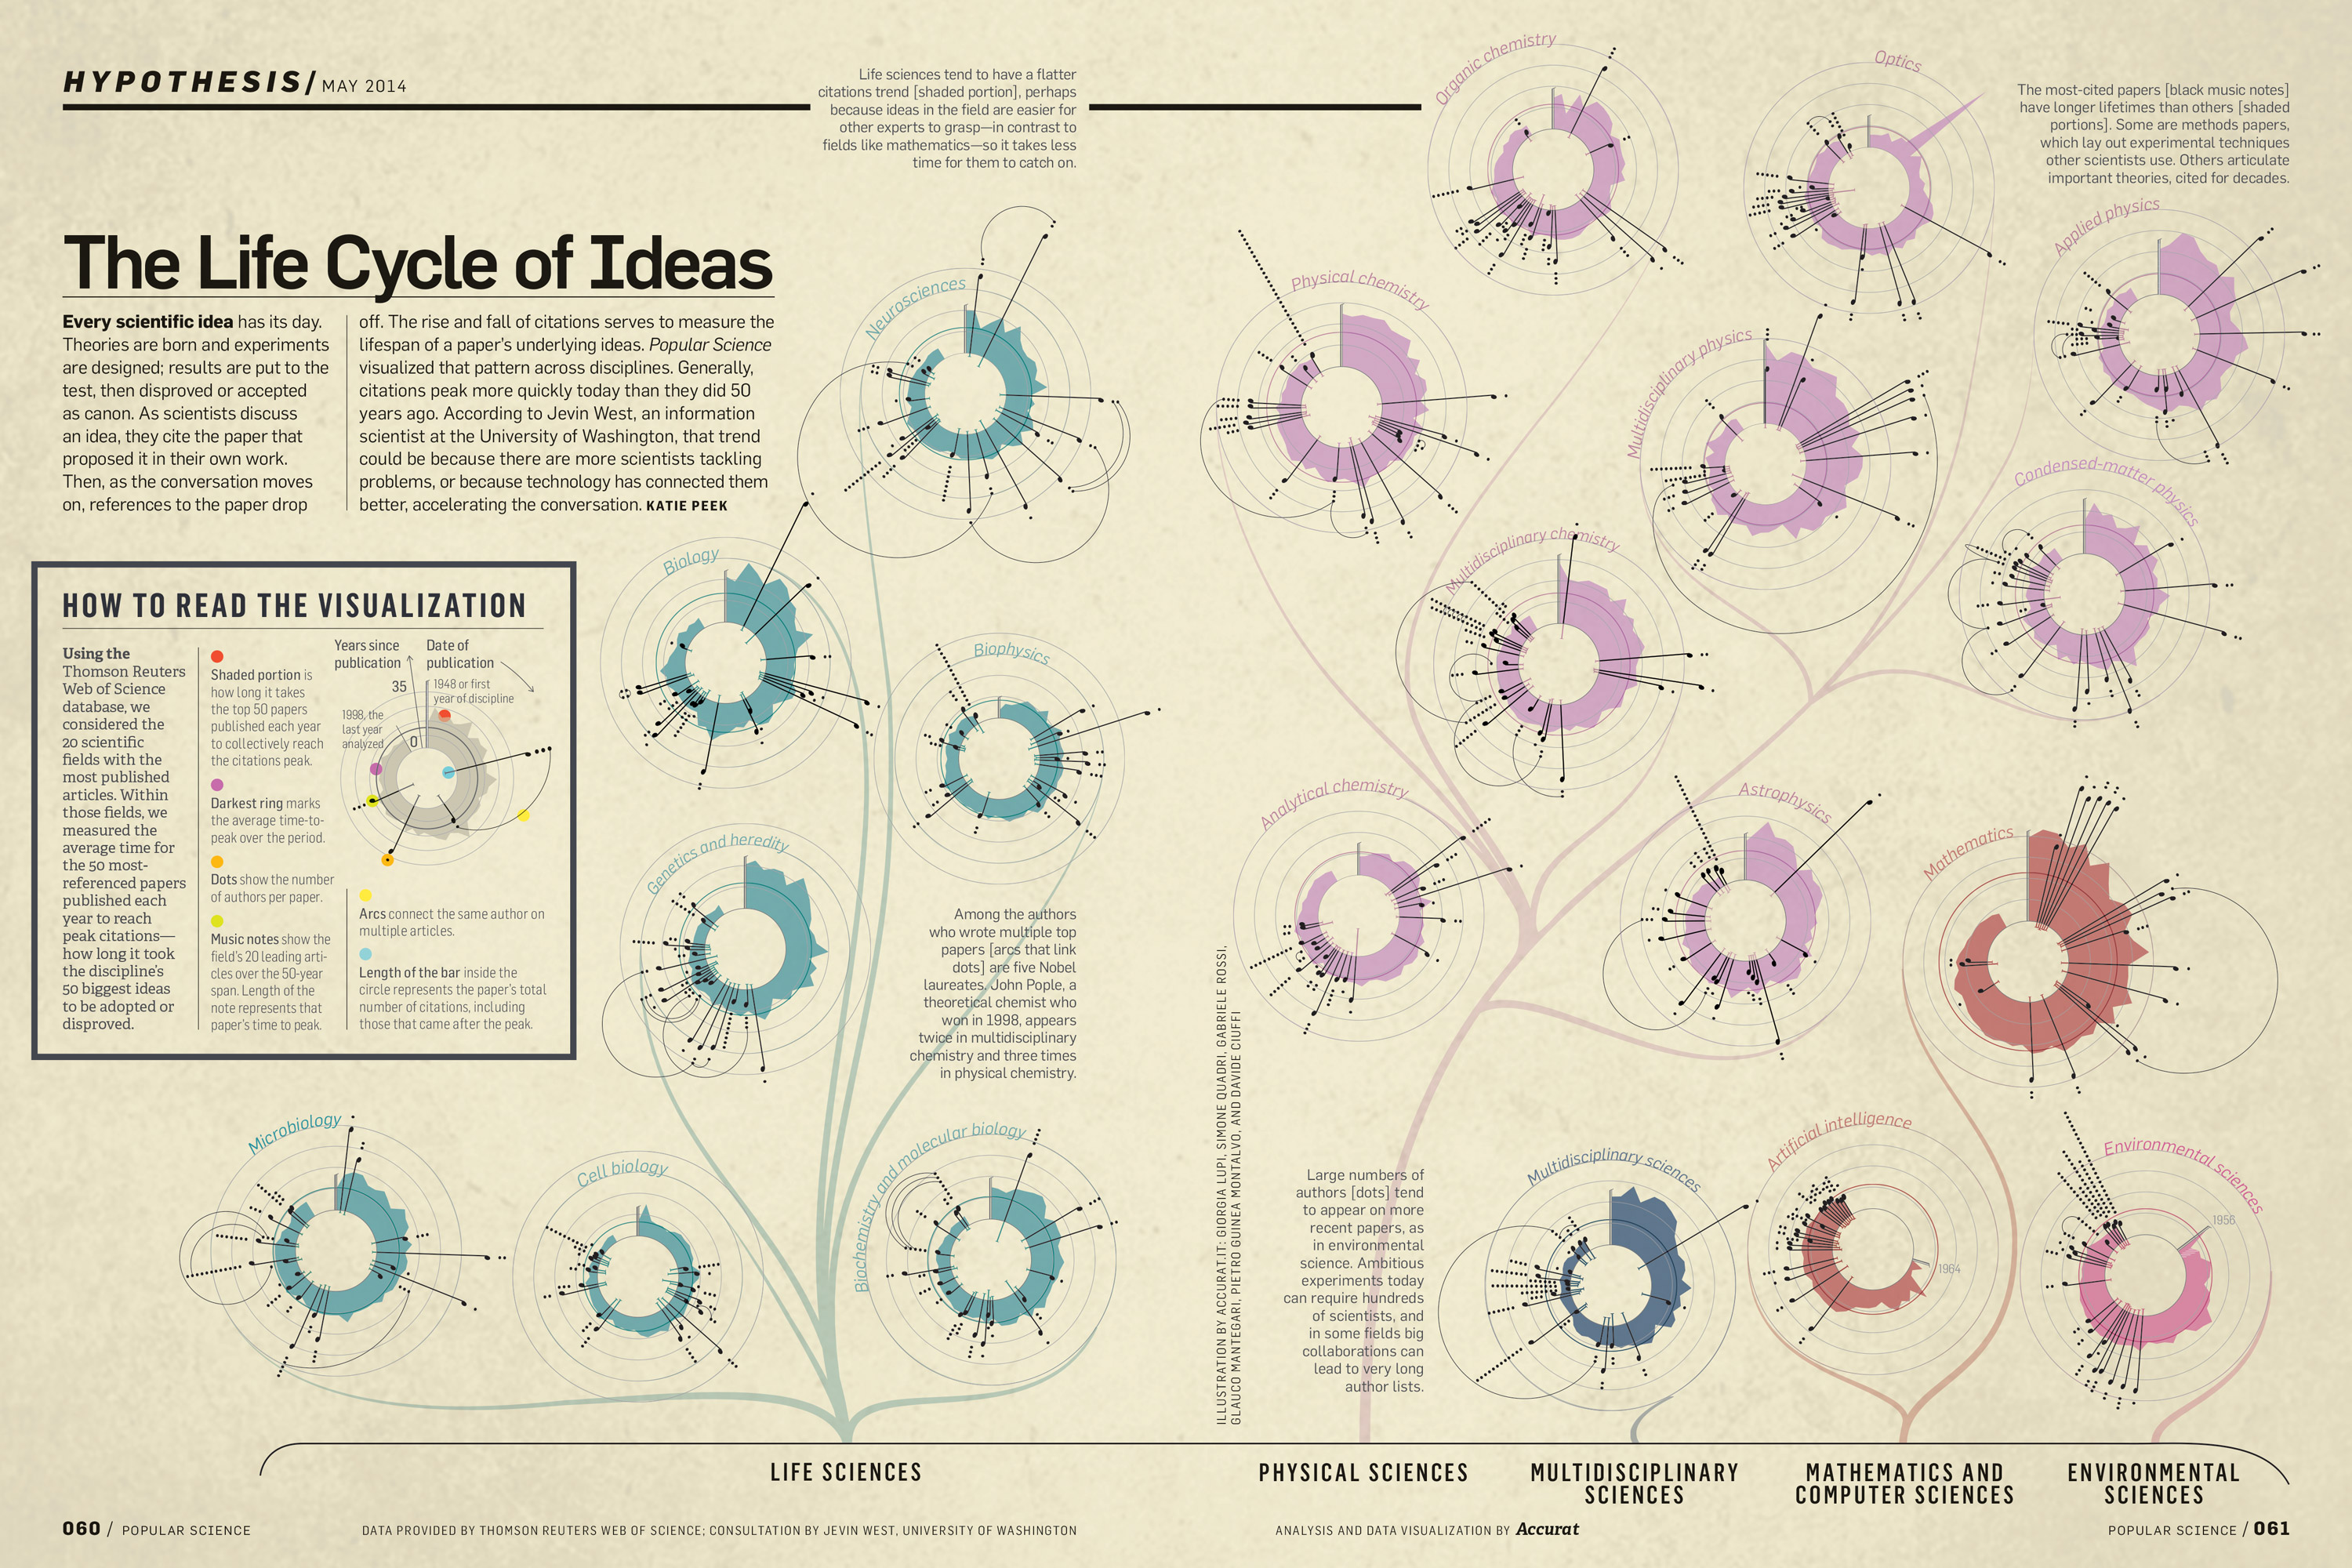 The Life Cycle of Ideas, Accurat for Popular Science